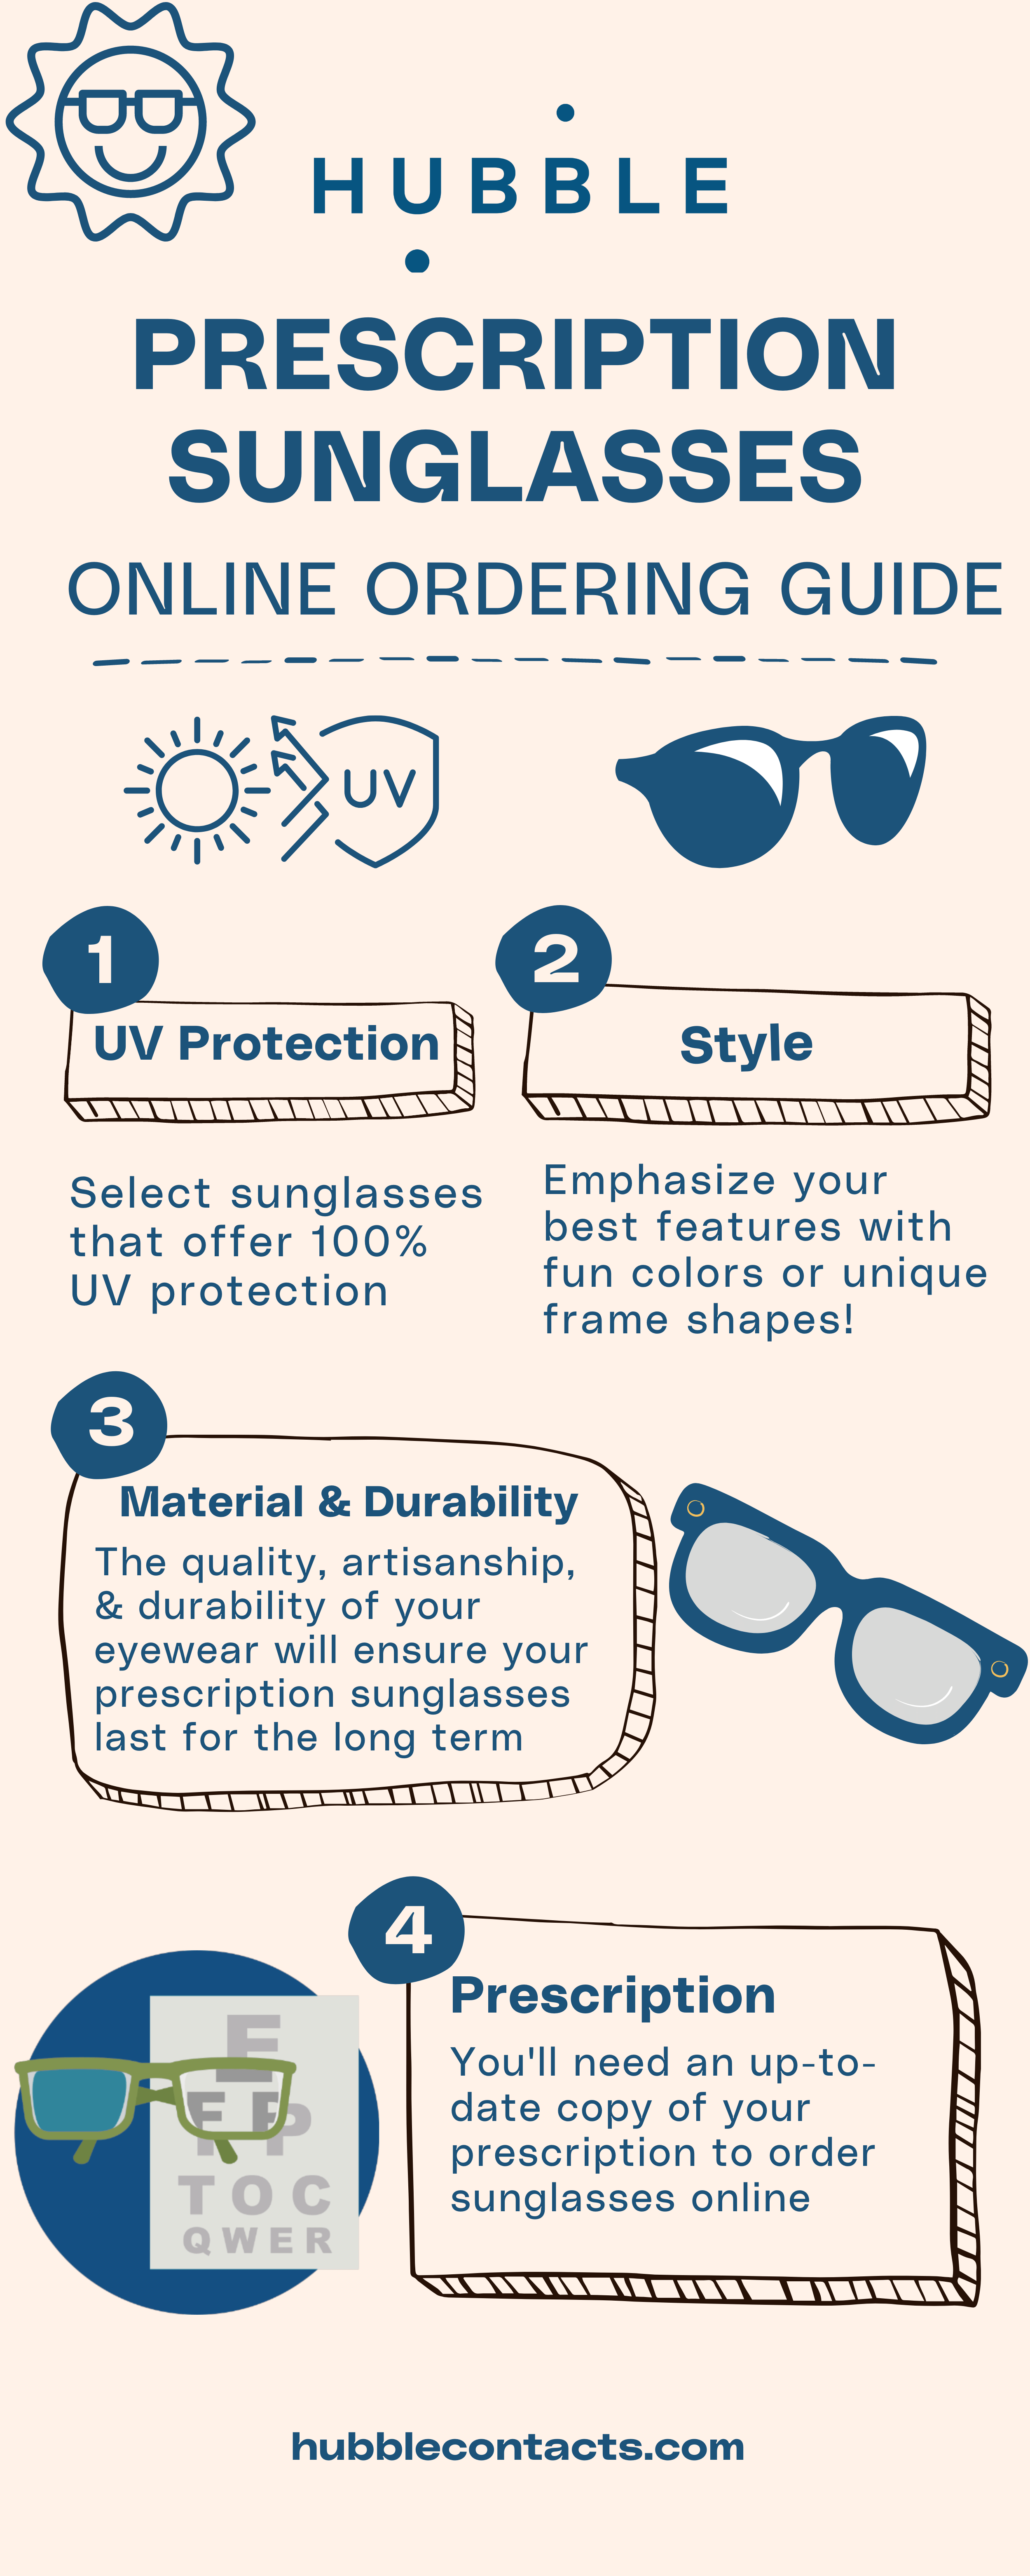 What's the deal with buying sunglasses? - Vision Magazine Online